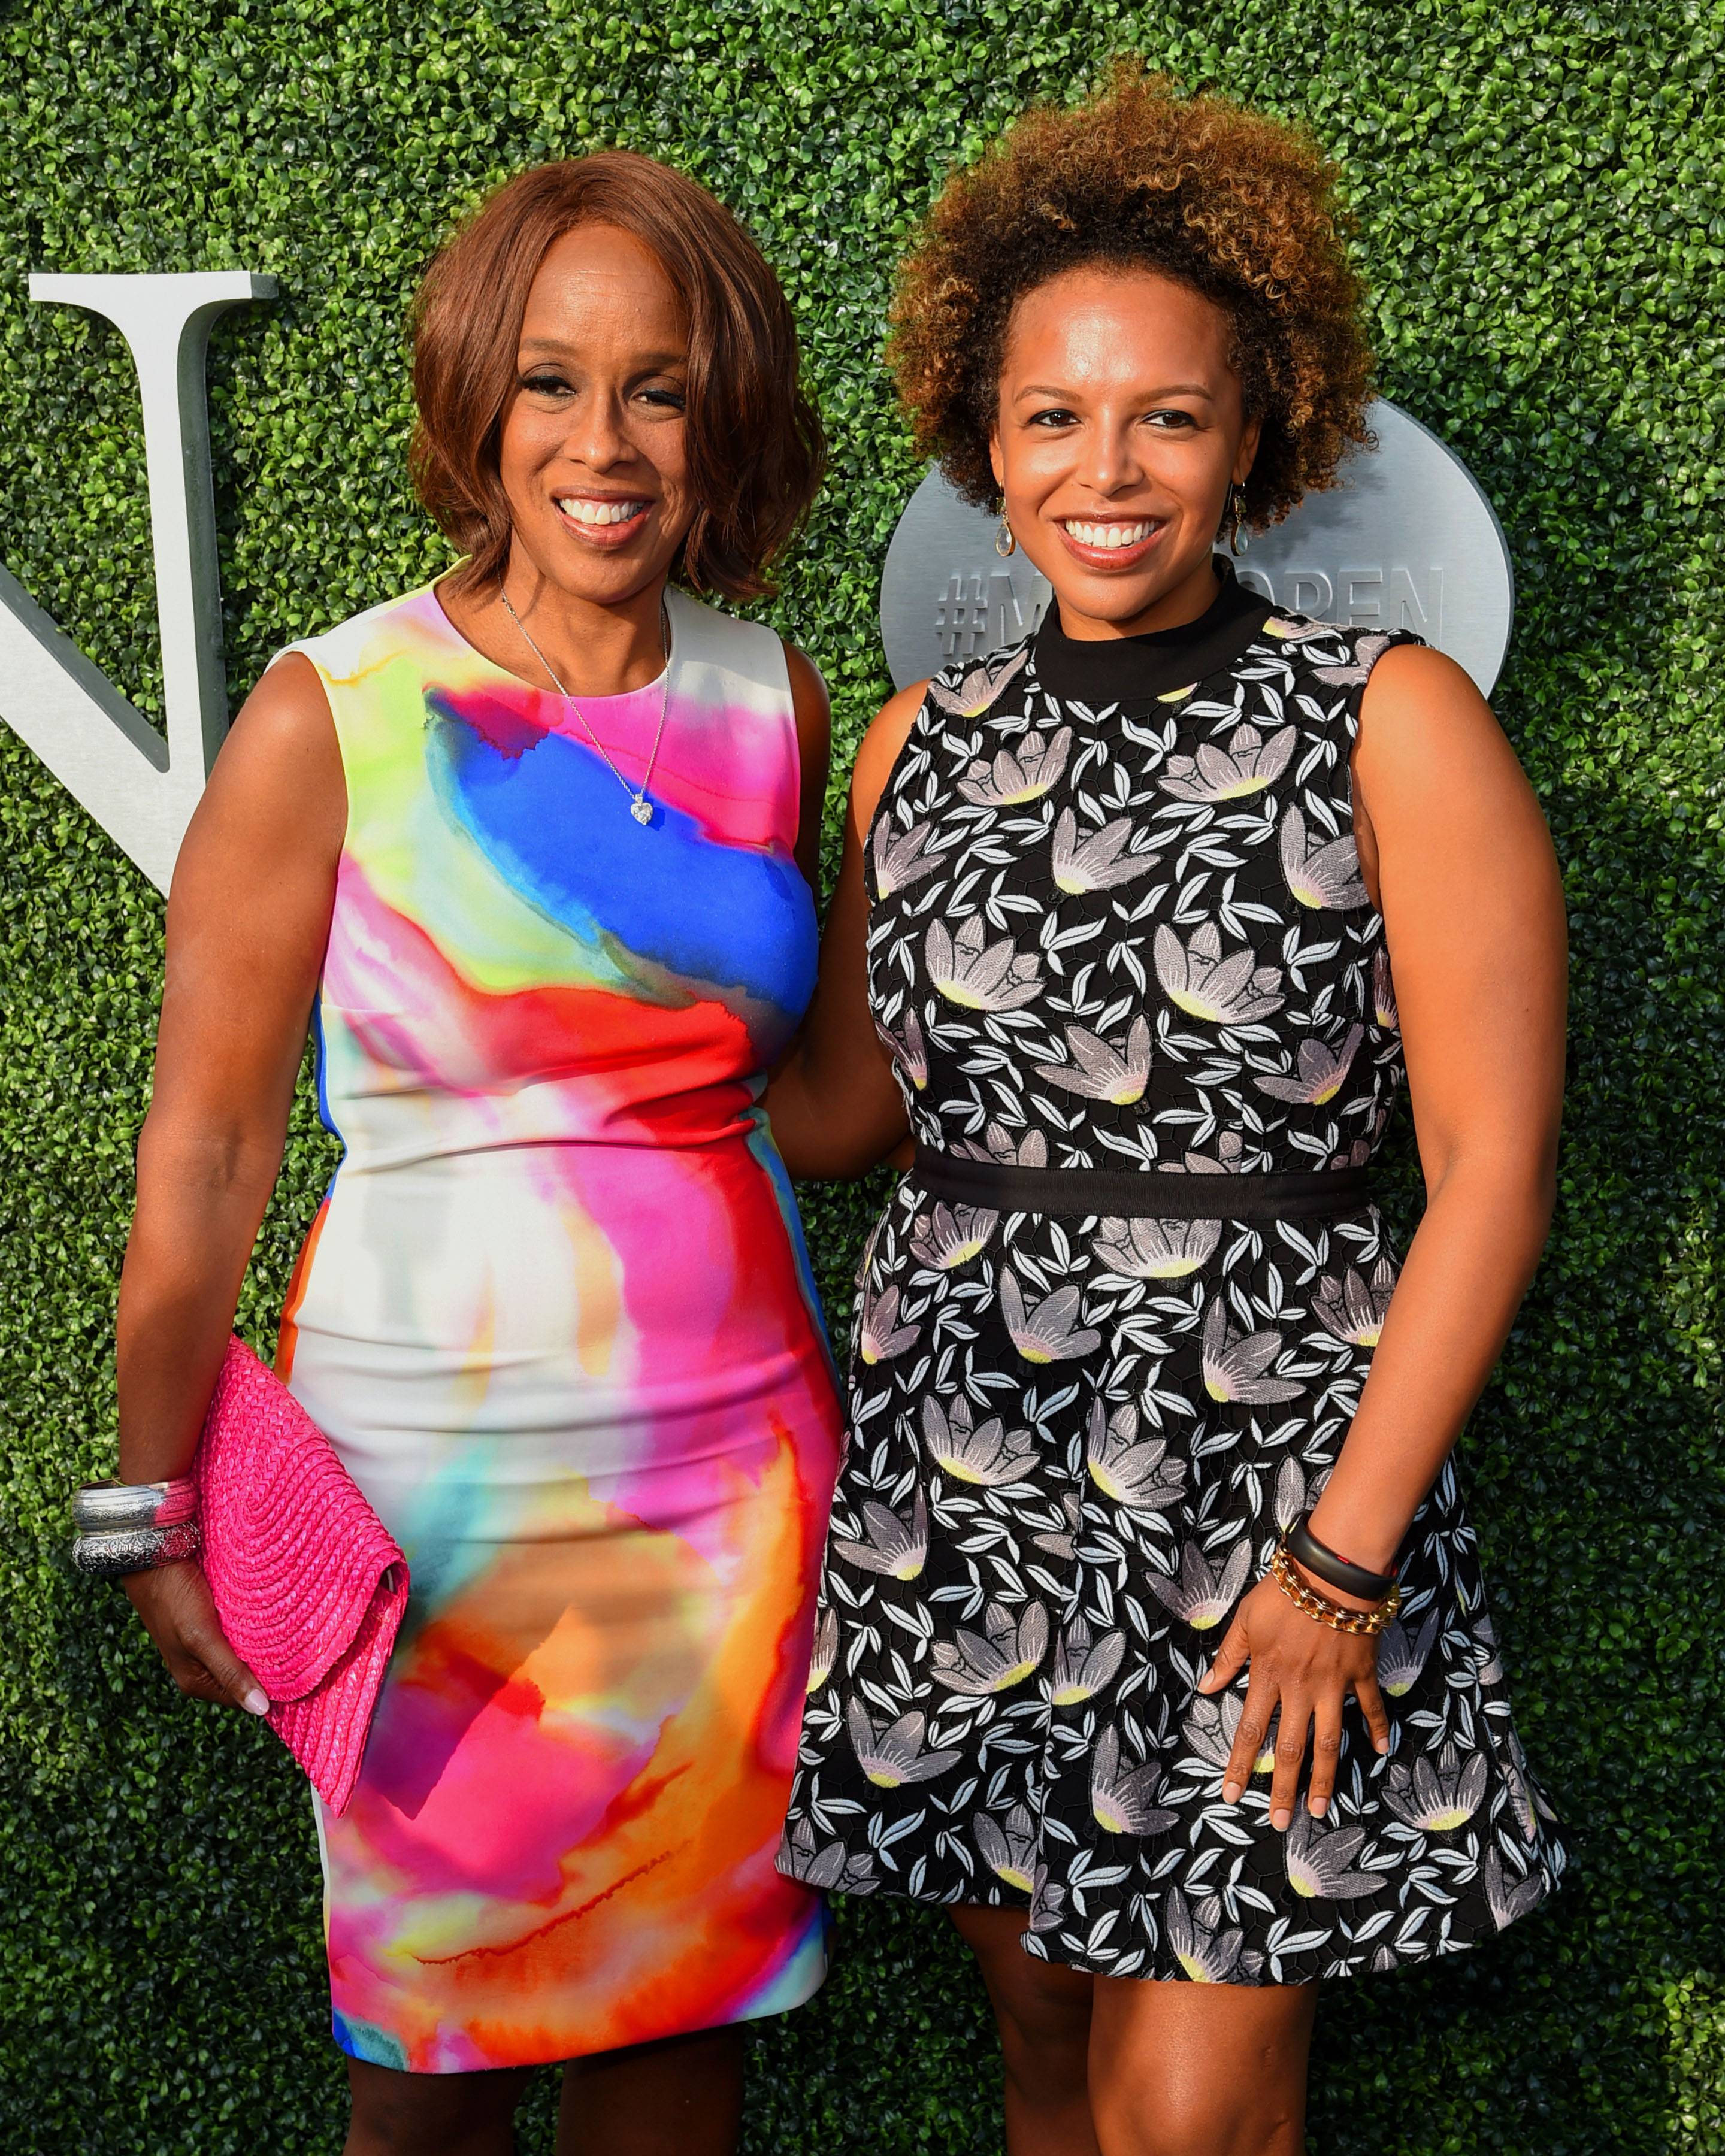 NEW YORK, NY - AUGUST 28:  Gayle King and Kirby Bumpus attends the 17th Annual USTA Foundation Opening Night Gala at USTA Billie Jean King National Tennis Center on August 28, 2017 in the Queens borough of New York City.  (Photo by Jamie McCarthy/Getty Images)